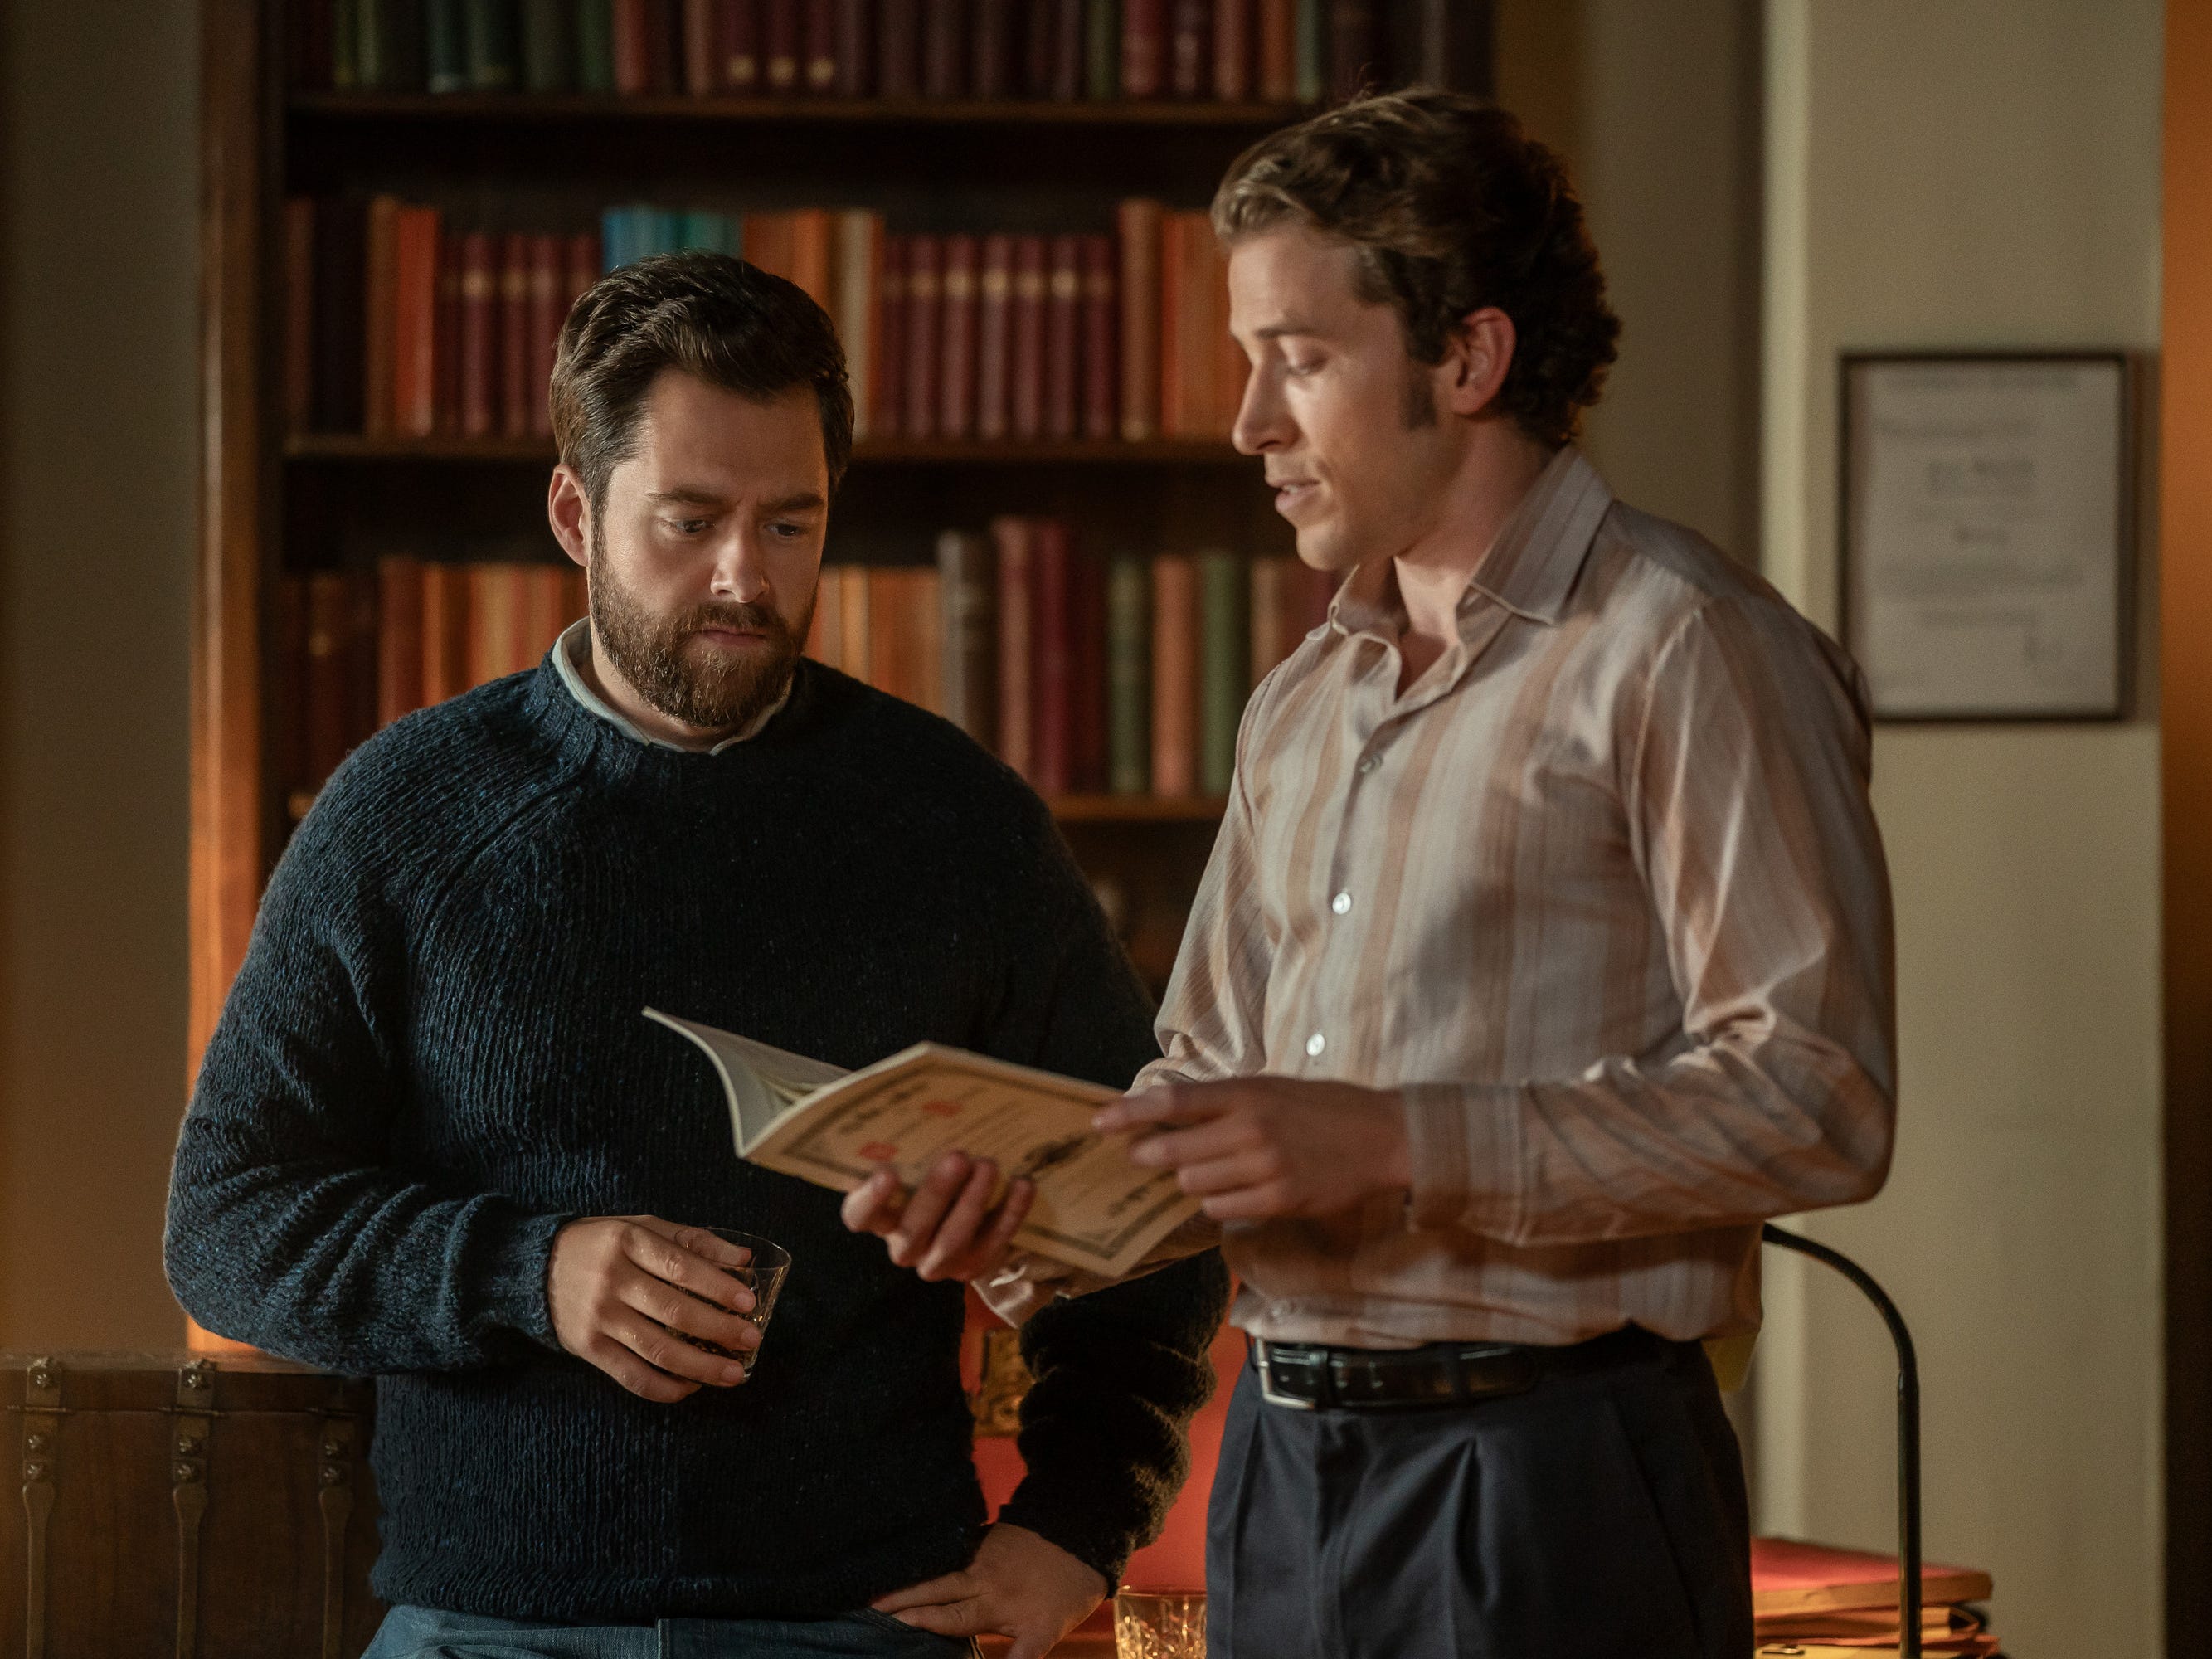 <p>After Roger MacKenzie (Richard Rankin) and William "Buck" Buccleigh MacKenzie (Diarmaid Murtagh) travel through the standing stones at Craigh na Dun, believing that Jemmy (Matthew Adair) was taken back in time to help Rob Cameron (Chris Fulton) locate the hidden Jacobite gold, Brianna MacKenzie (Sophie Skelton) receives an unexpected visitor at Lallybroch: Rob.</p><p>Jemmy, it turns out, isn't actually back in the 1700s. He's locked in an underground tunnel beneath Loch Errochty, and Brianna is told she will only reunite with him if she gives into Rob's lecherous demands for sex.</p>